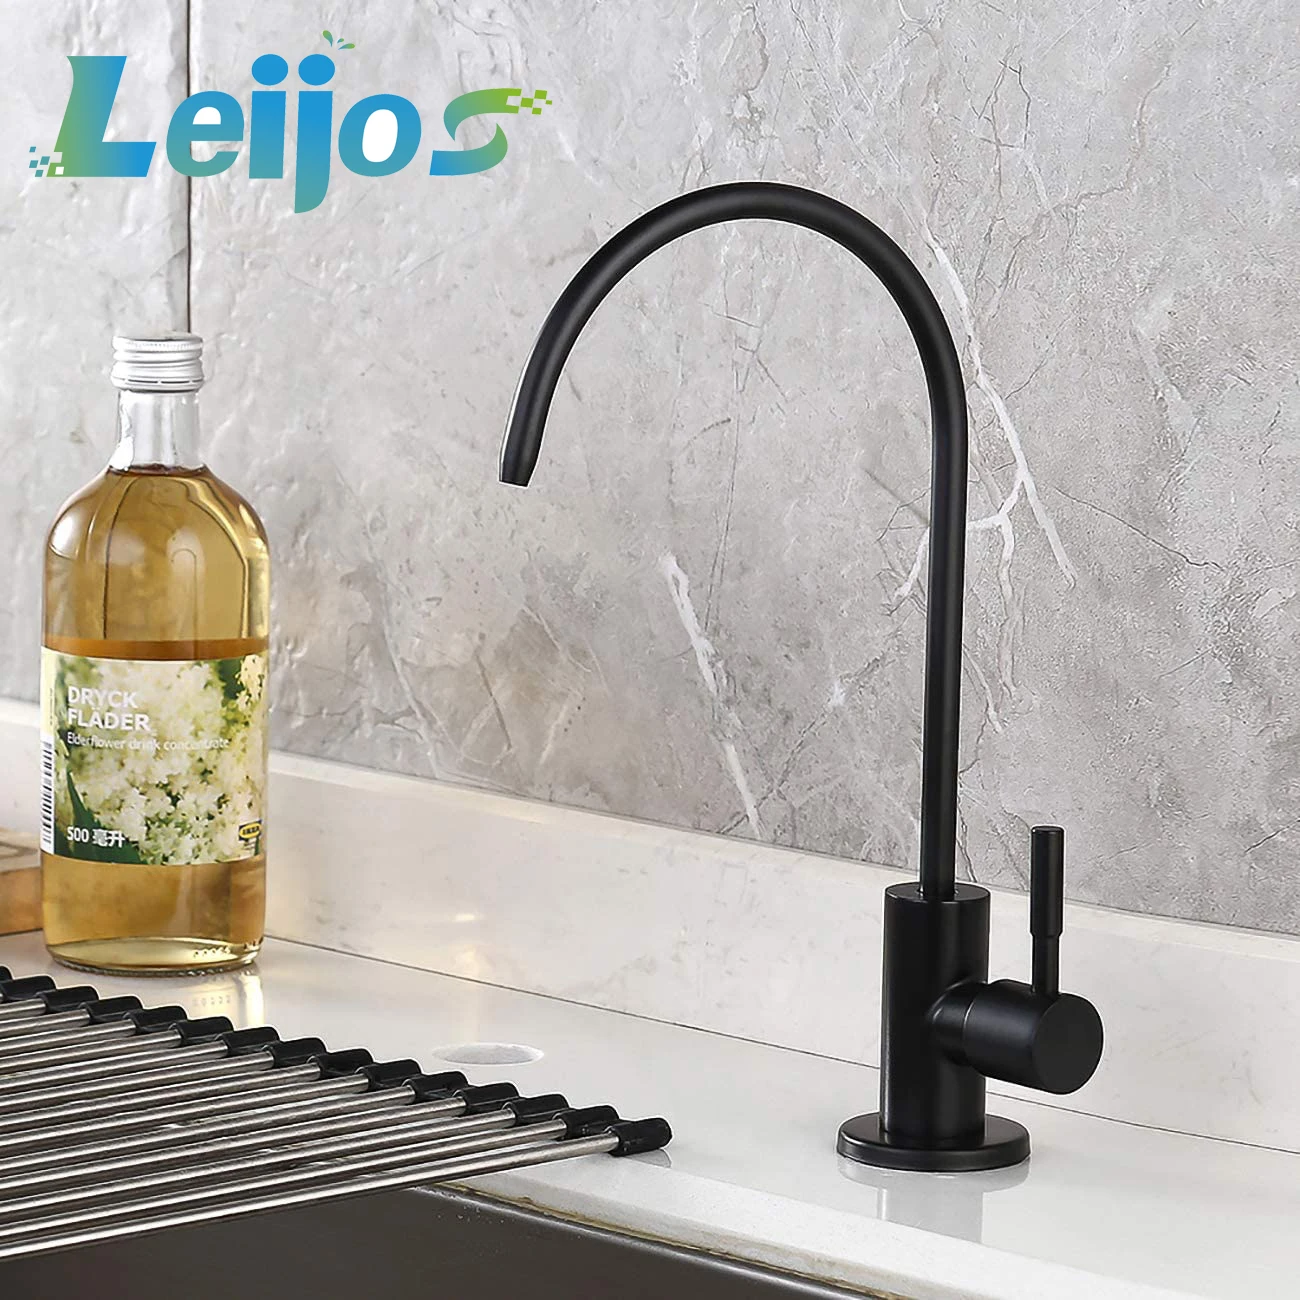 

Drinking Water Faucet, Kitchen Water Purifier Faucet for Non-Air Gap Reverse Osmosis Water Filtration System, Matte Black